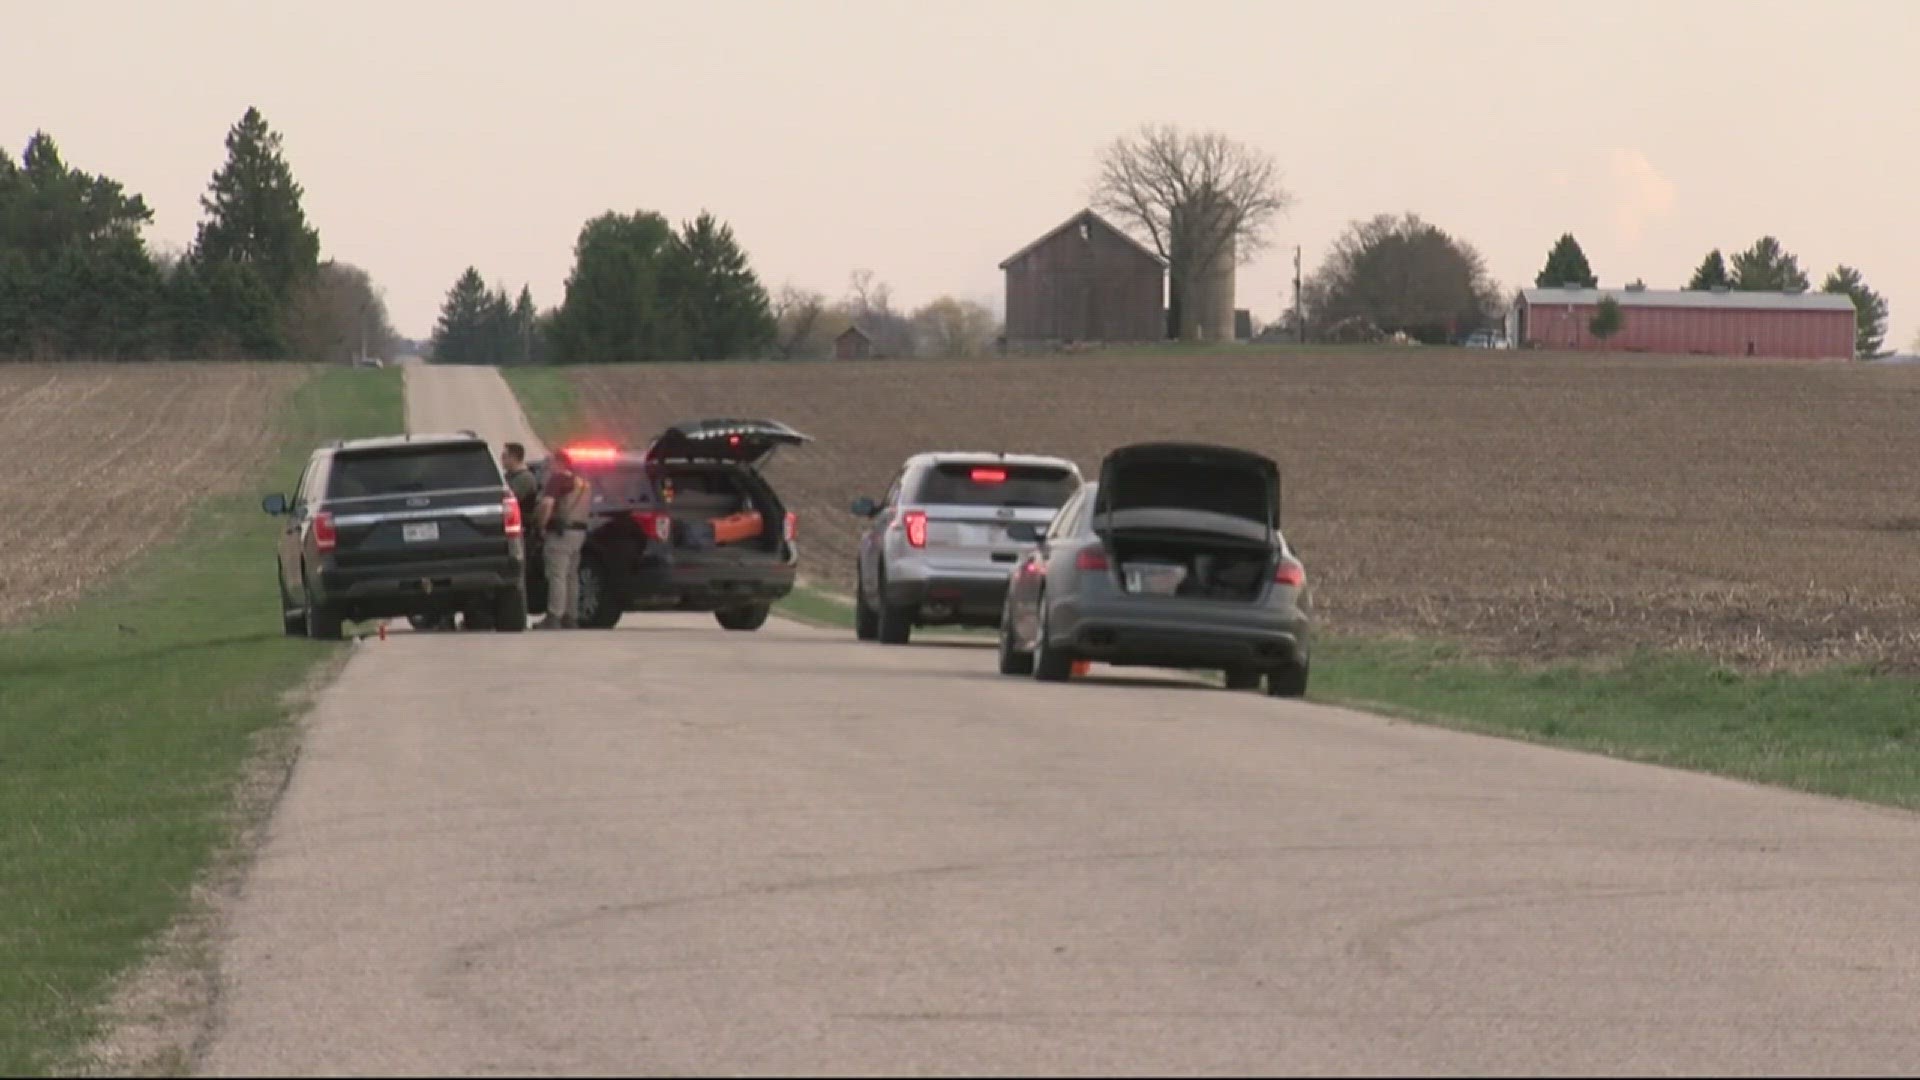 Three people are dead following a bi-state crime spree that started in Dubuque County, Iowa, and ended with a police stand-off in Dane County, Wisconsin.